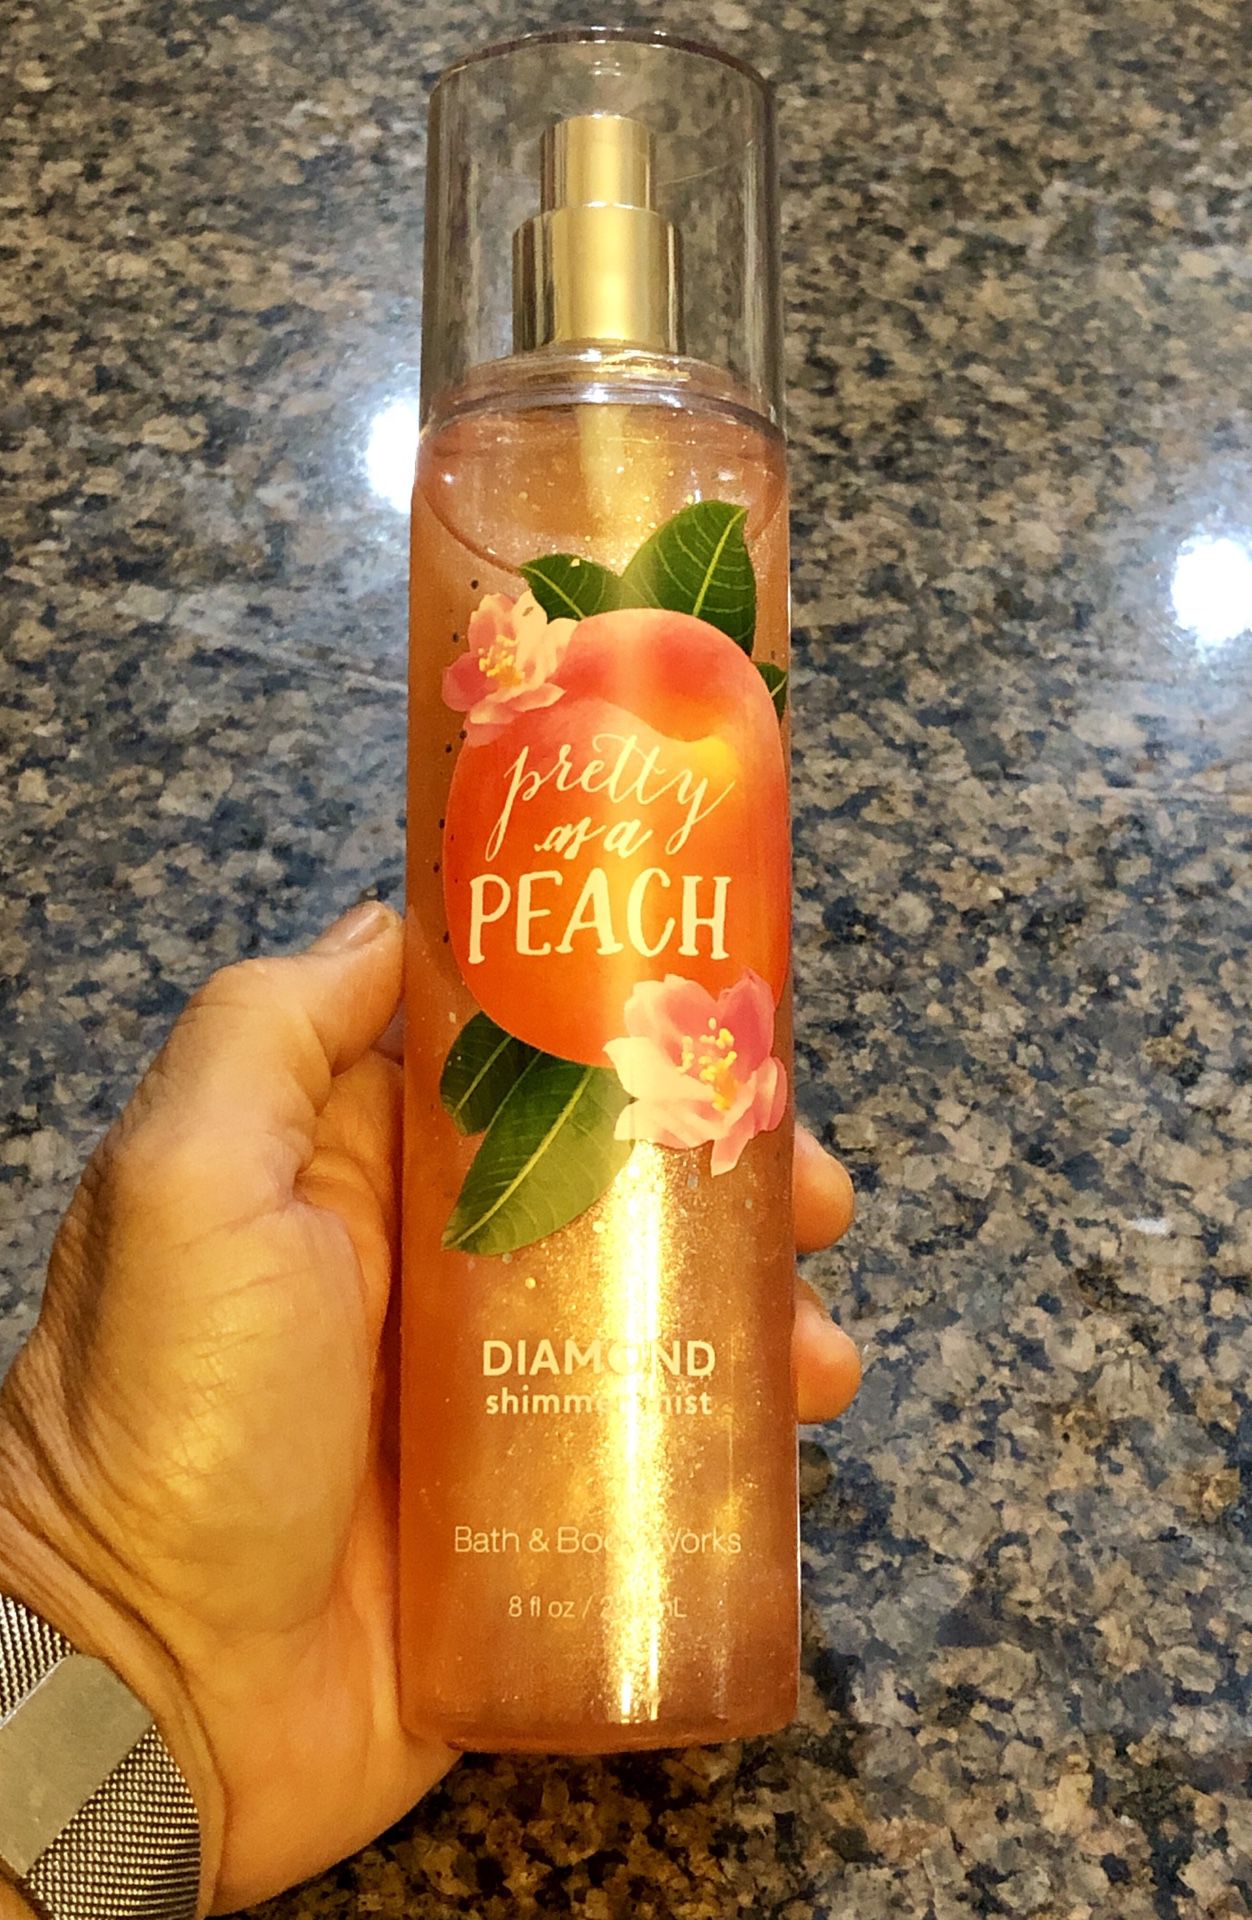 New! Pretty as a Peach Diamond Shimmer mist 8oz. From Bath and Body Works. Never used!